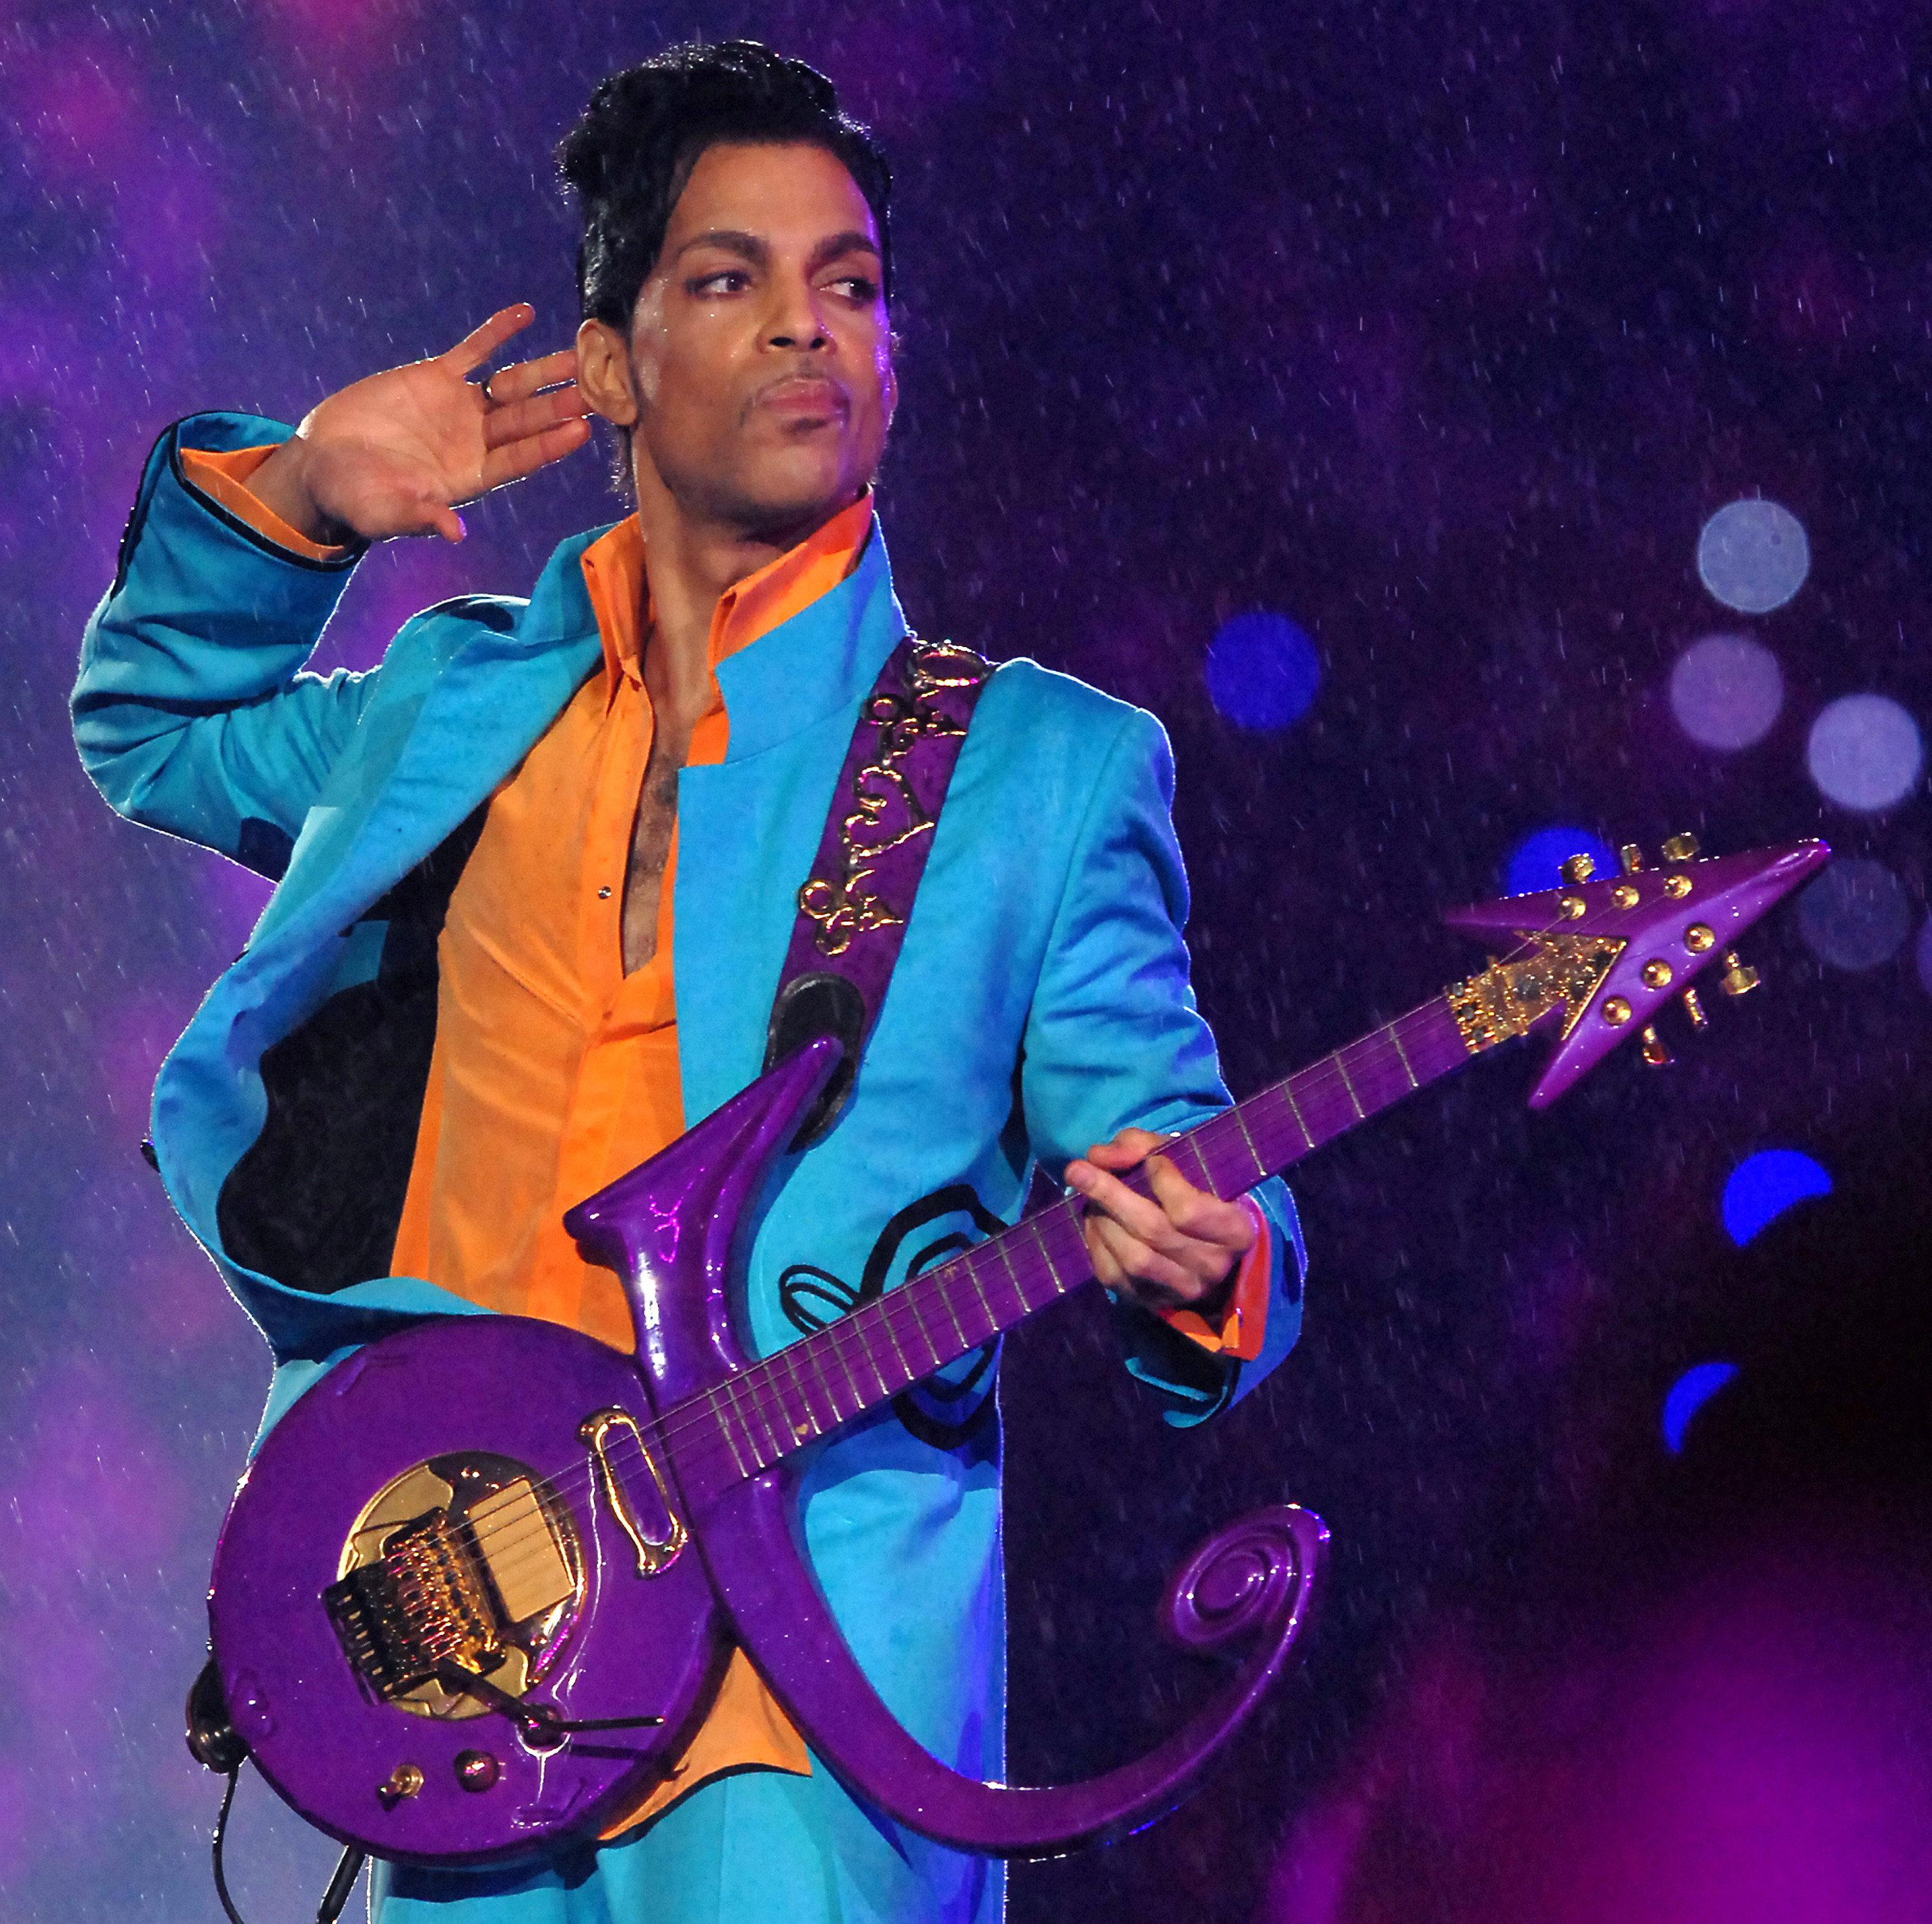 Prince with a purple guitar